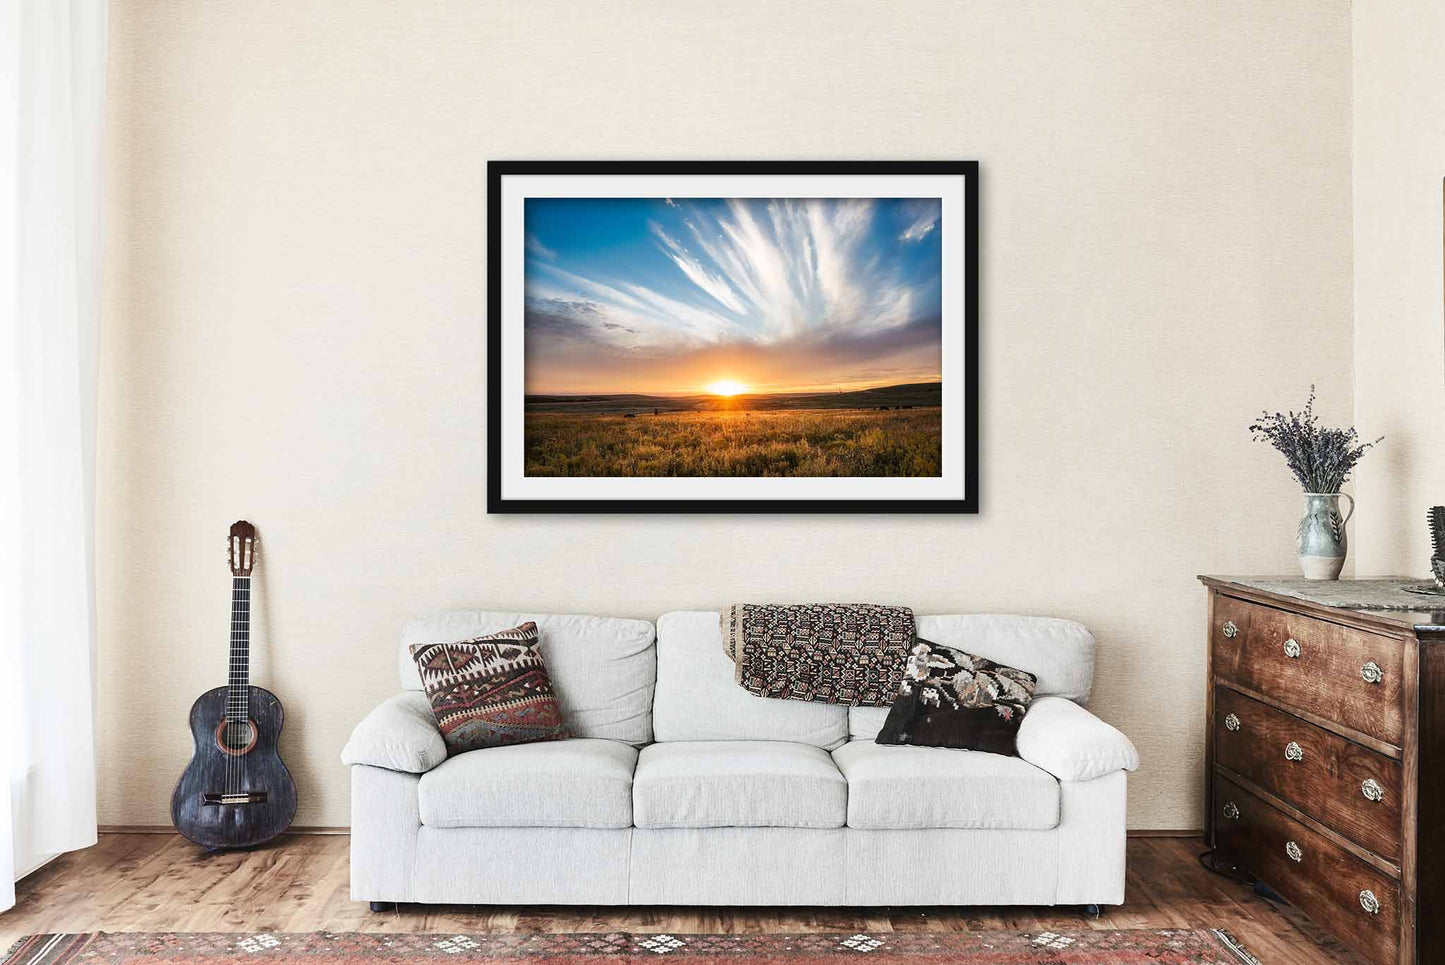 Framed Great Plains Print (Ready to Hang) Picture of Golden Sunset Over Tallgrass Prairie in Oklahoma Osage County Wall Art Western Decor